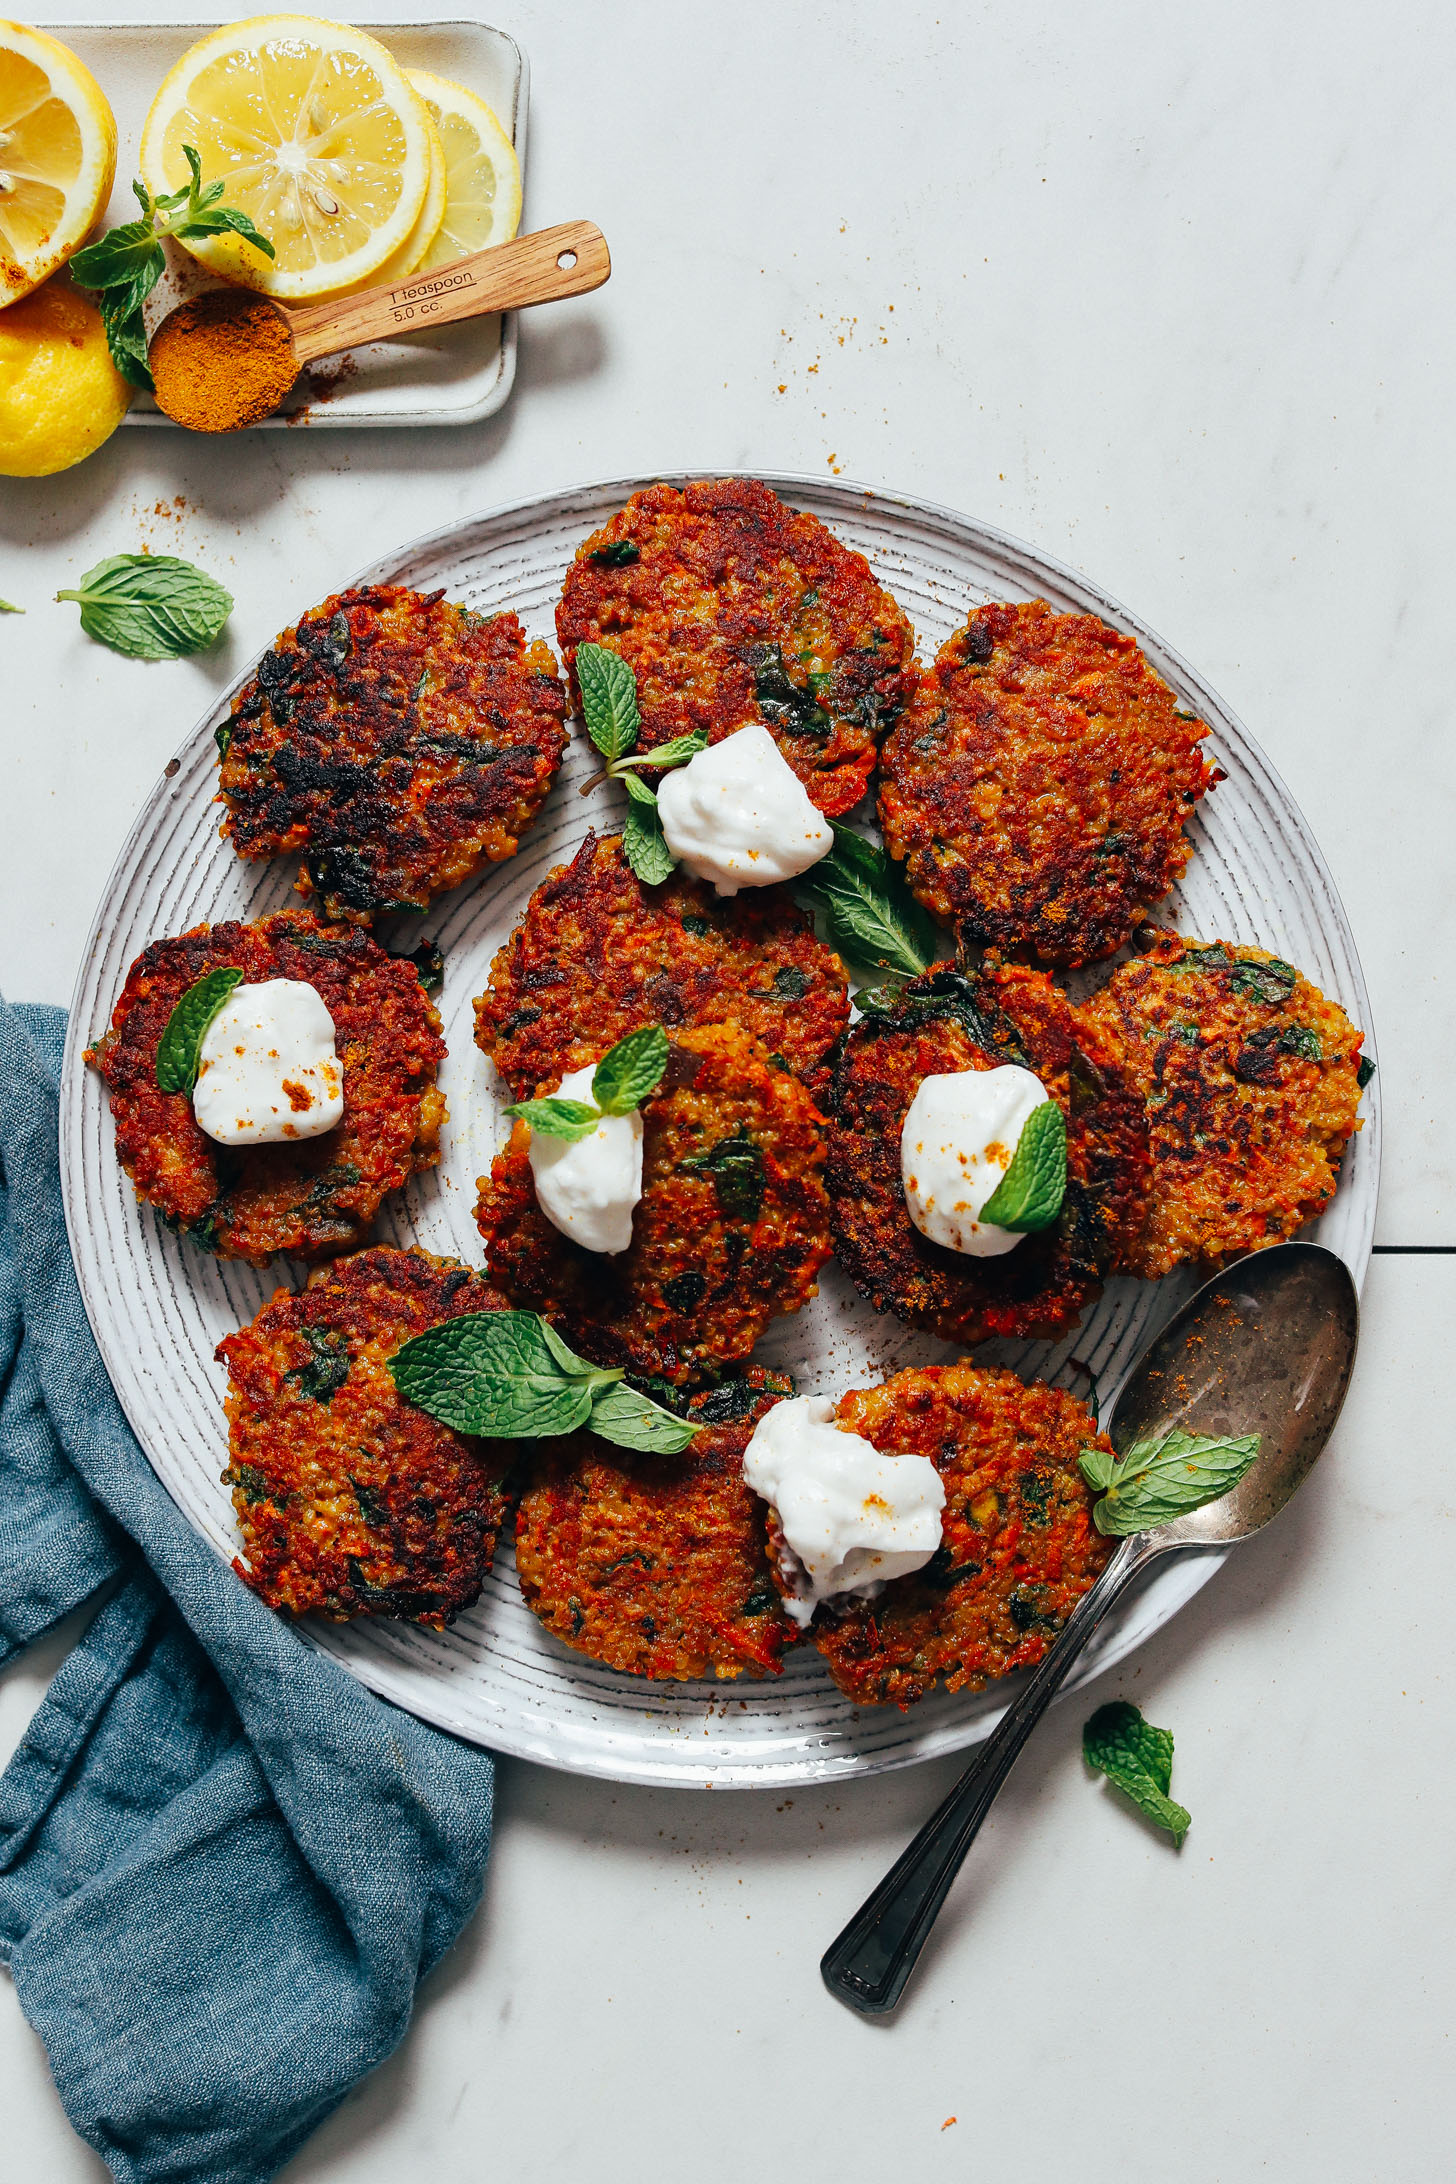 Large serving platter of our Quinoa Sweet Potato Fritters recipe